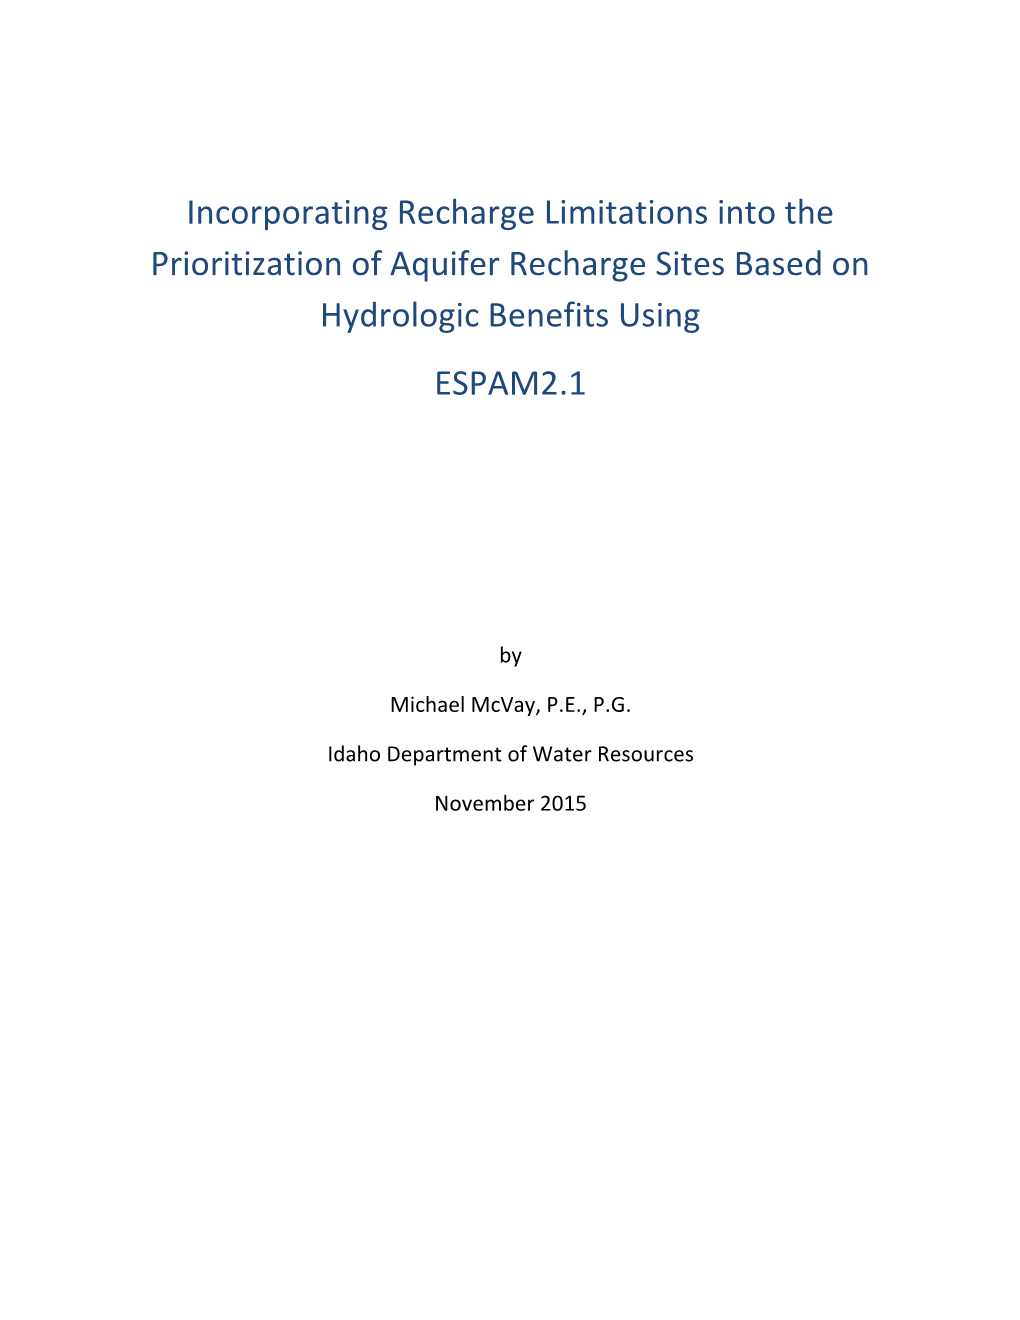 Incorporating Recharge Limitations Into the Prioritization of Aquifer Recharge Sites Based on Hydrologic Benefits Using ESPAM2.1